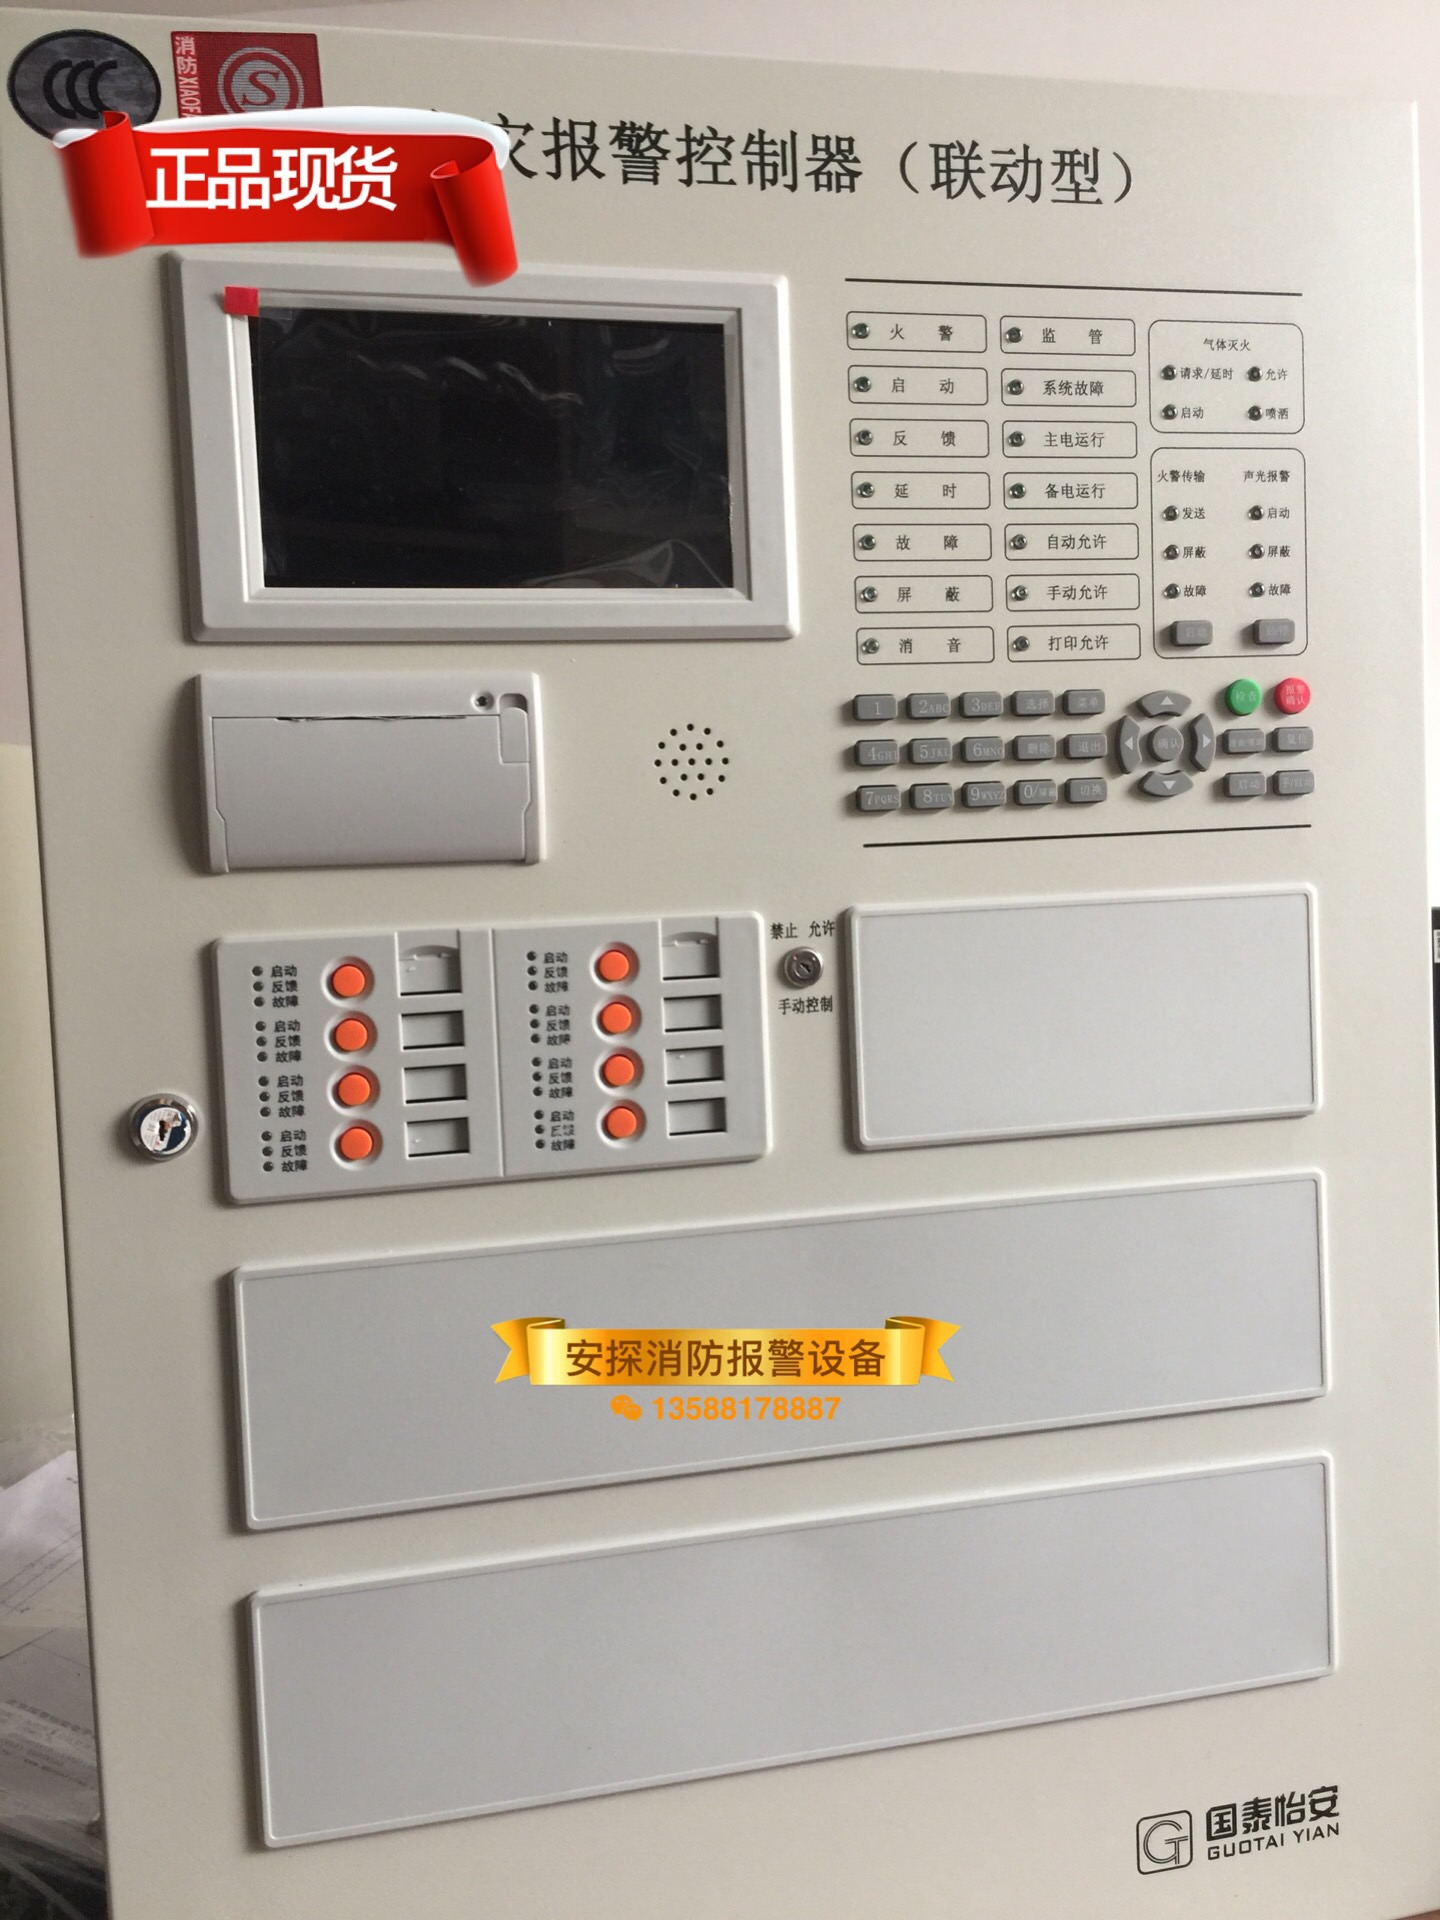 Cathay Yi'an fire alarm controller (linkage type) fire alarm host wall-mounted enclosure machine GK702